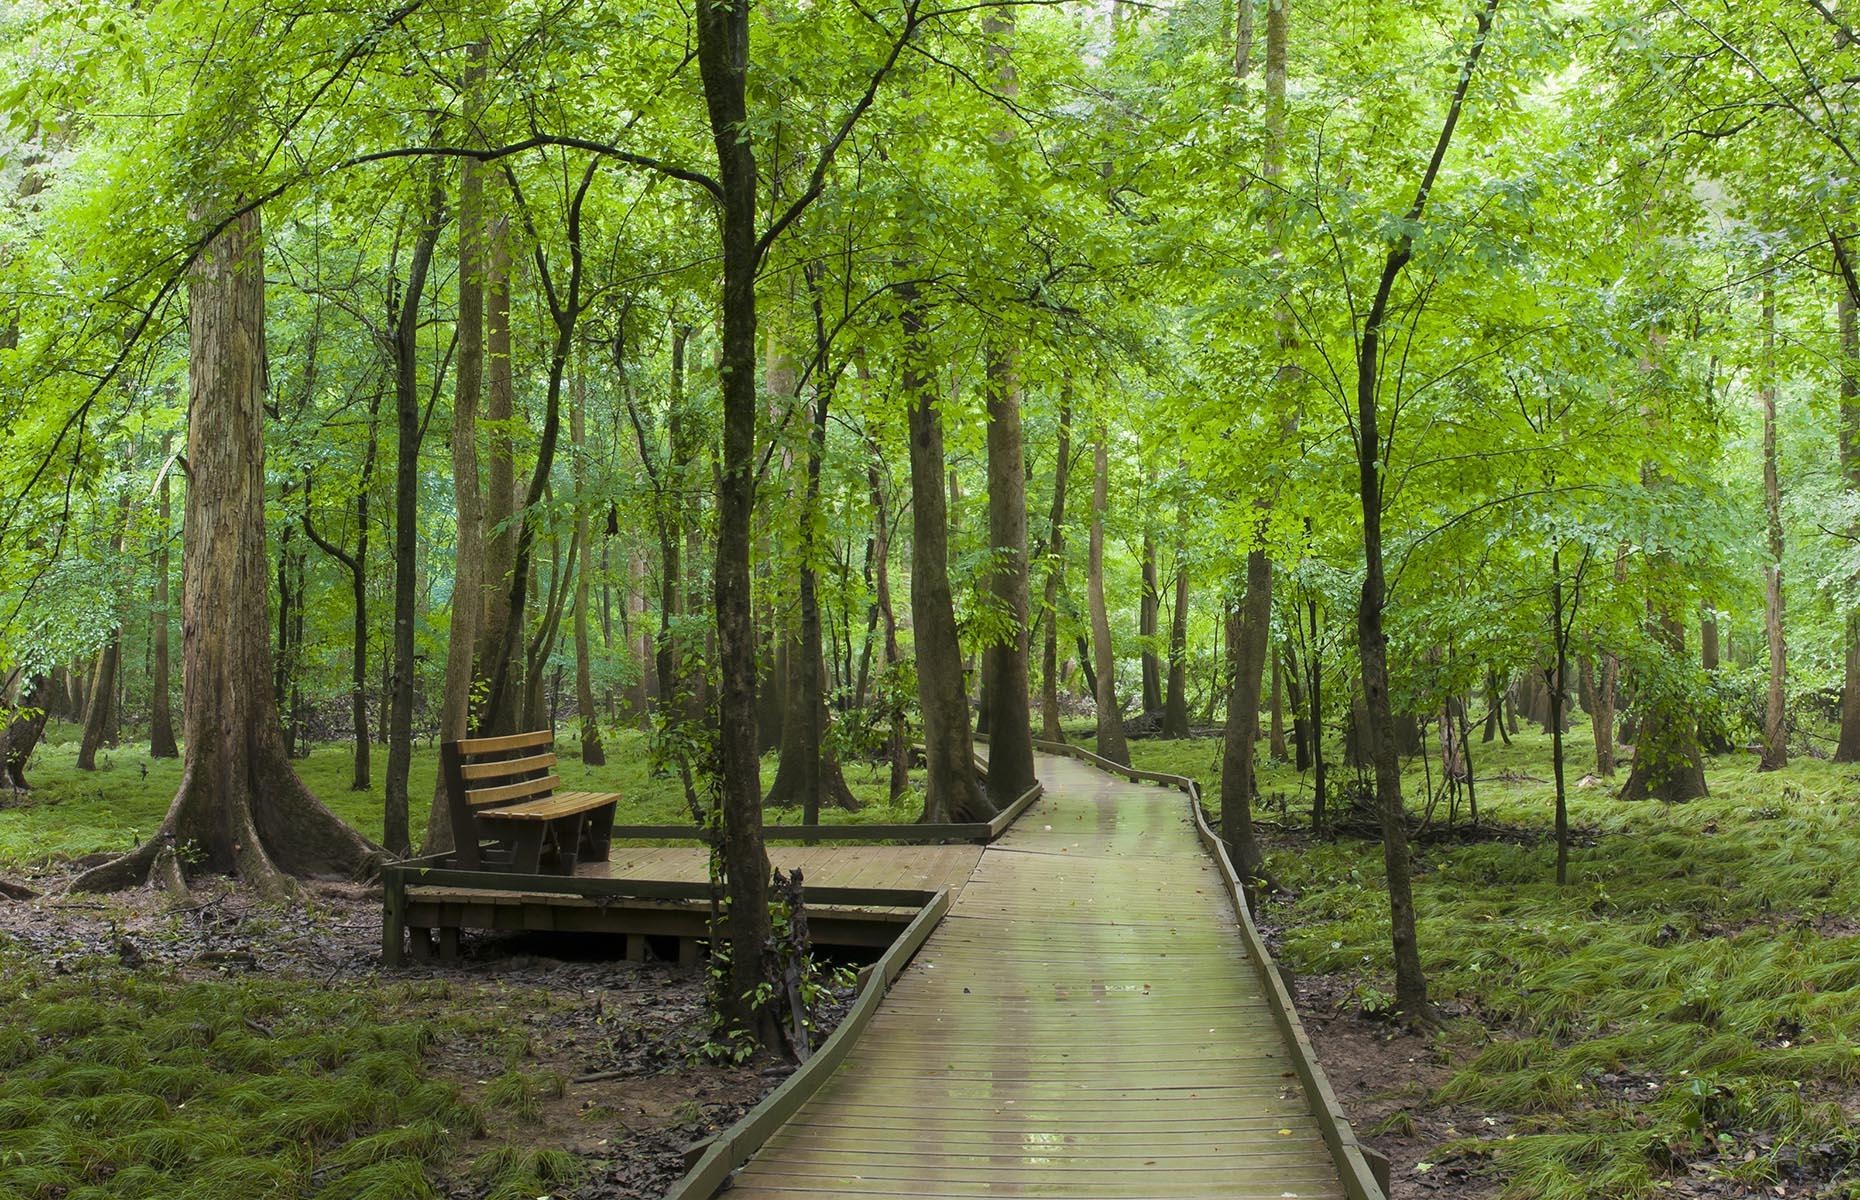 <p>One of the best things about Columbia is that it never takes long to get from the middle of town to the middle of nowhere. The free-to-enter, 24-hour <a href="https://www.nps.gov/cong/index.htm">Congaree National Park</a> is just 30 minutes from downtown Columbia. It encompasses nearly 27,000 acres, offering 25 miles (40km) of hiking trails and plenty of opportunities for birdwatching, picnicking, canoeing and kayaking. Nearby Lake Murray has scenic landscapes and gorgeous sunsets too.</p>